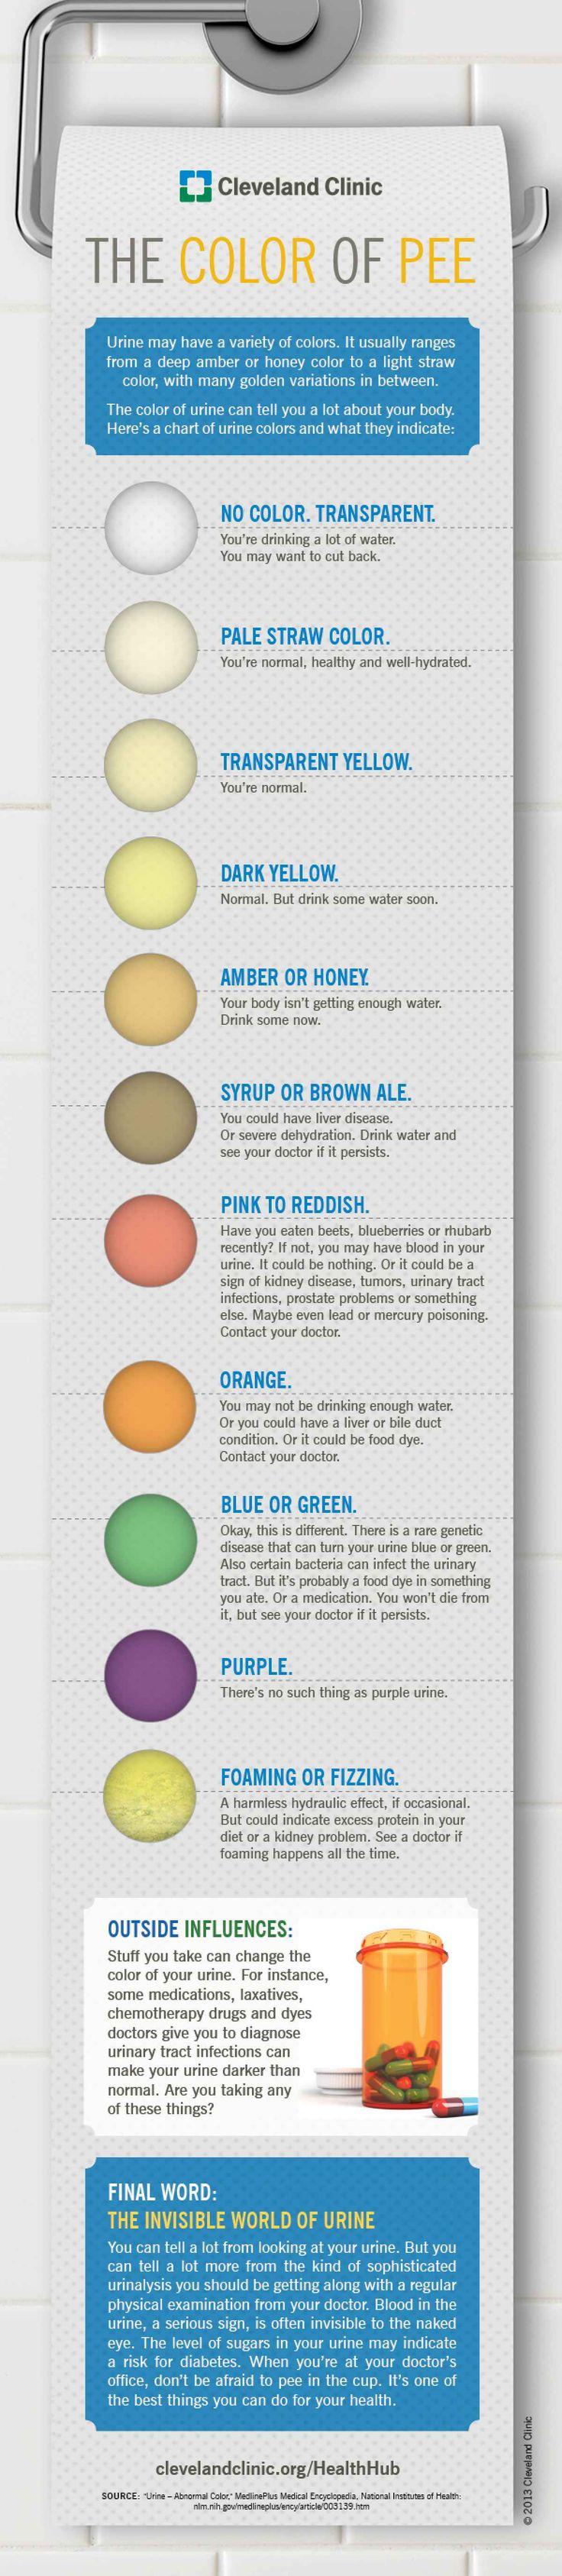 Wedding - What Your Urine Color Says About You